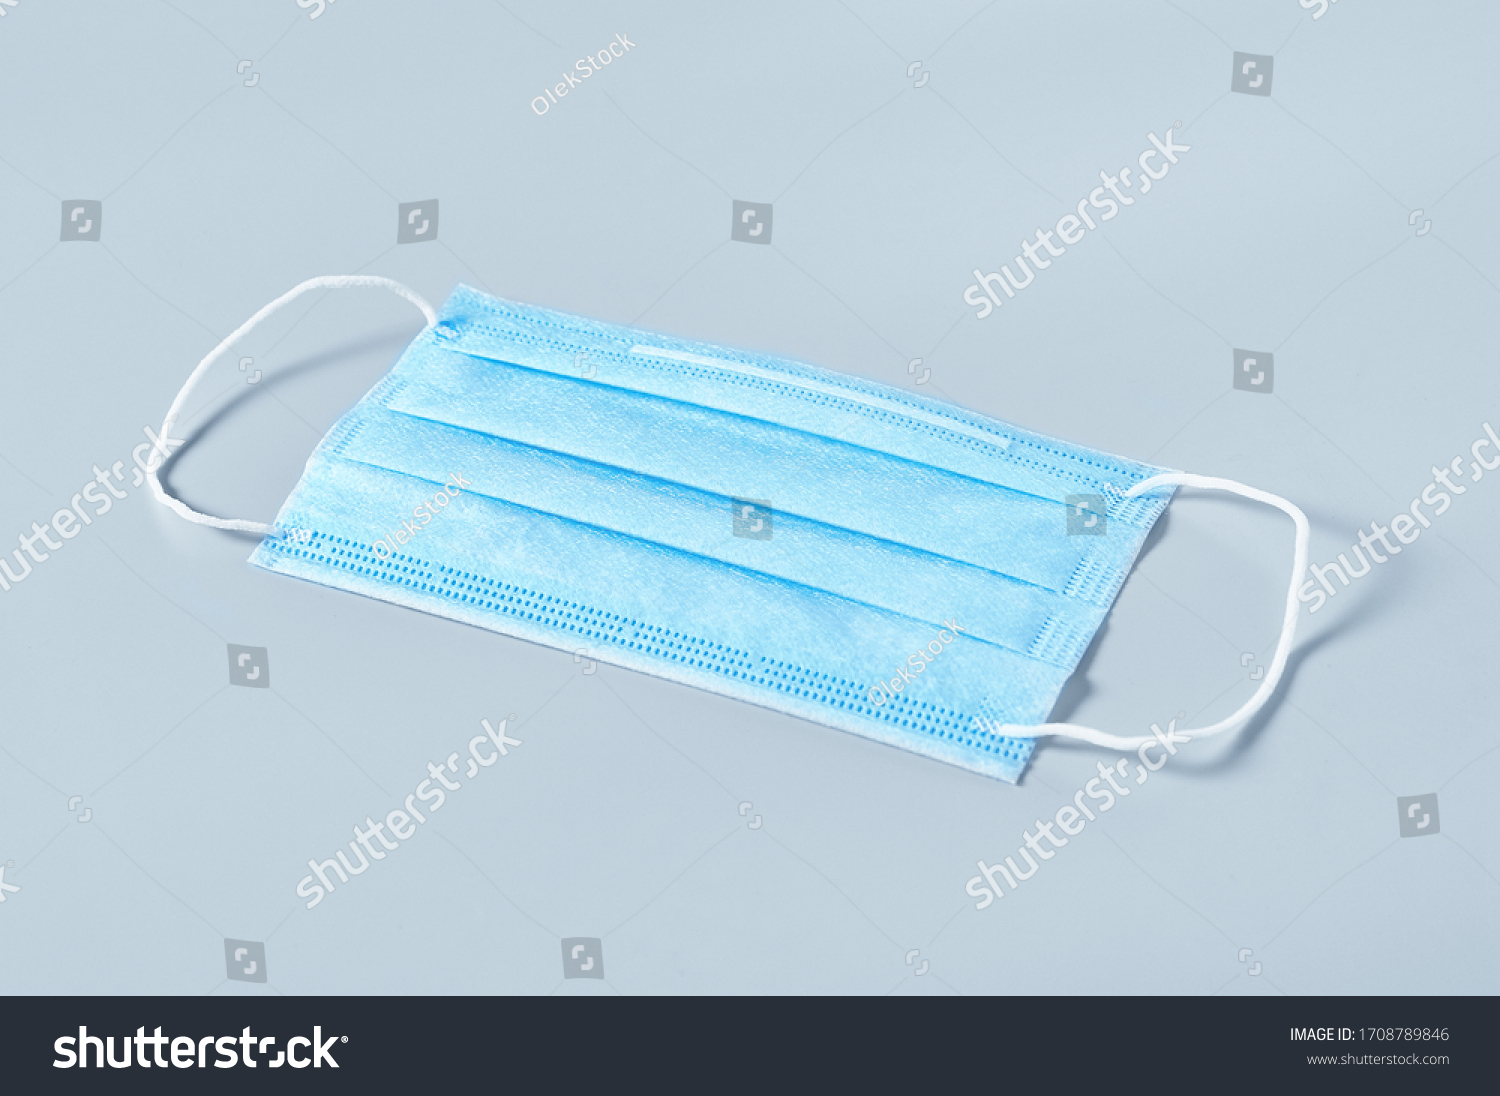 Surgical mask for cover mouth and nose on gray background. Concept of protection, virus epidemic or pandemic, corona virus, covid-19 #1708789846